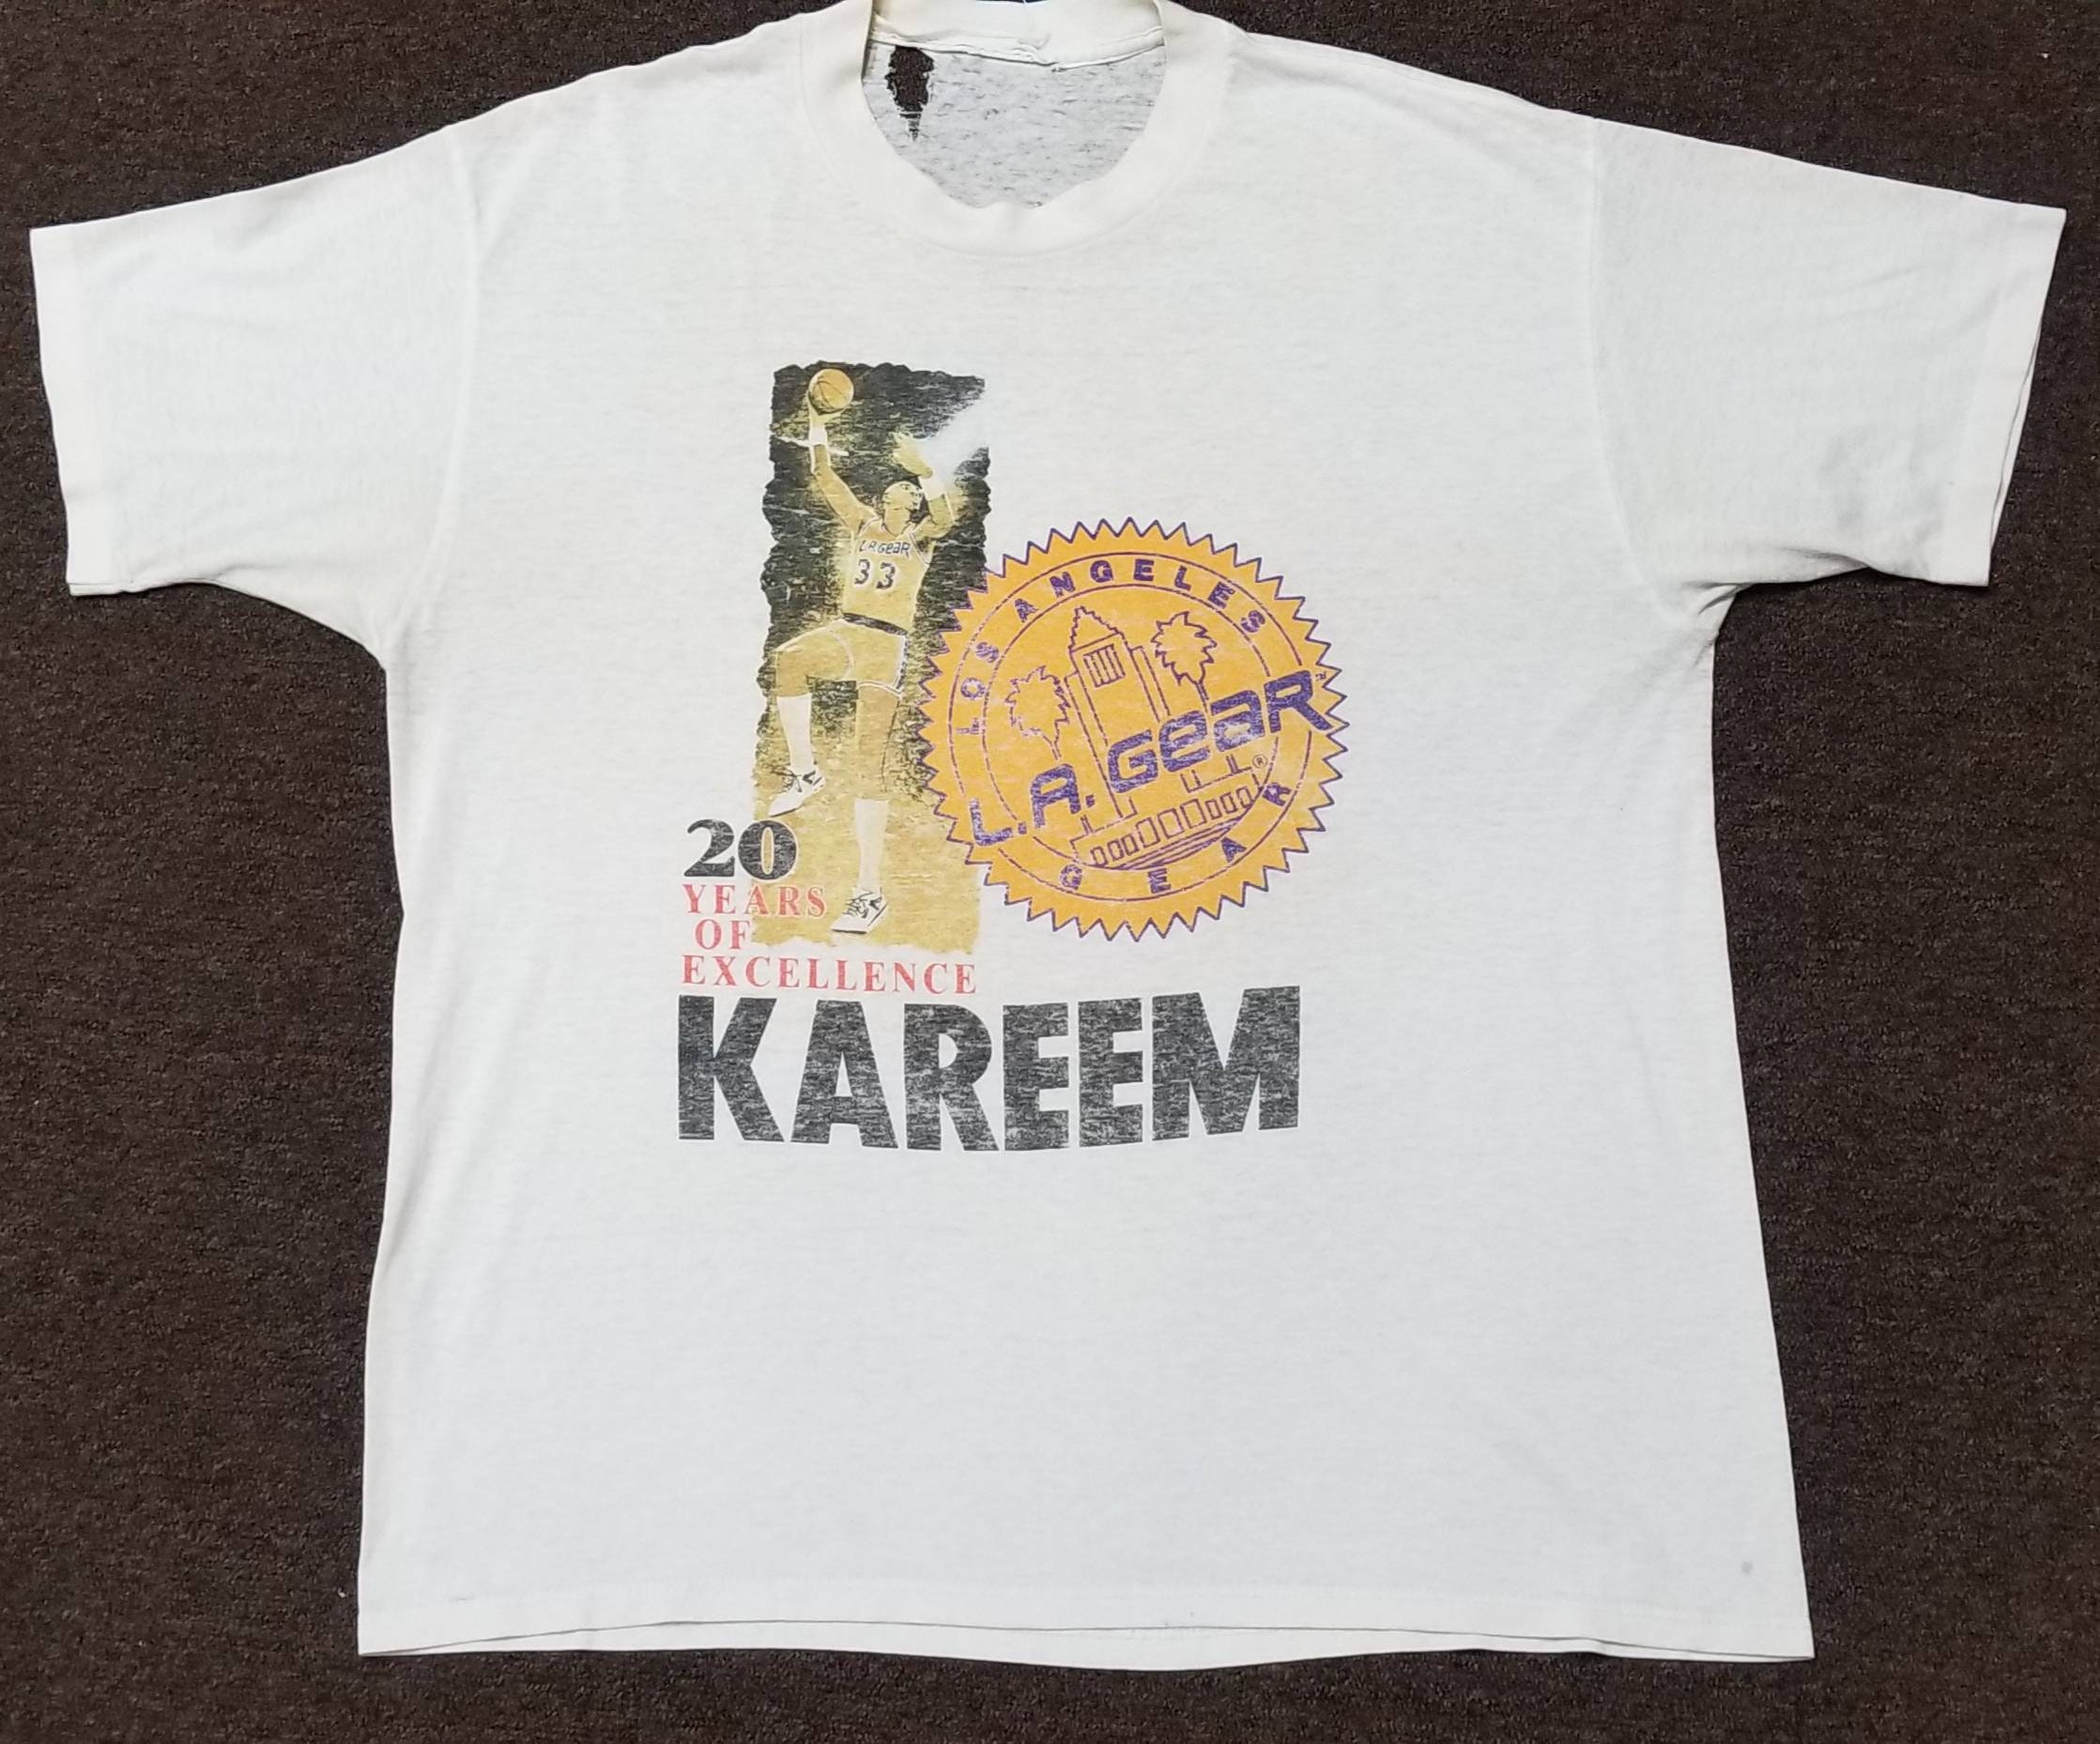 Above Surface Lakers Kareem Abdul-Jabbar Inspired MVP Collection Vintage Series T-Shirt Small / Black